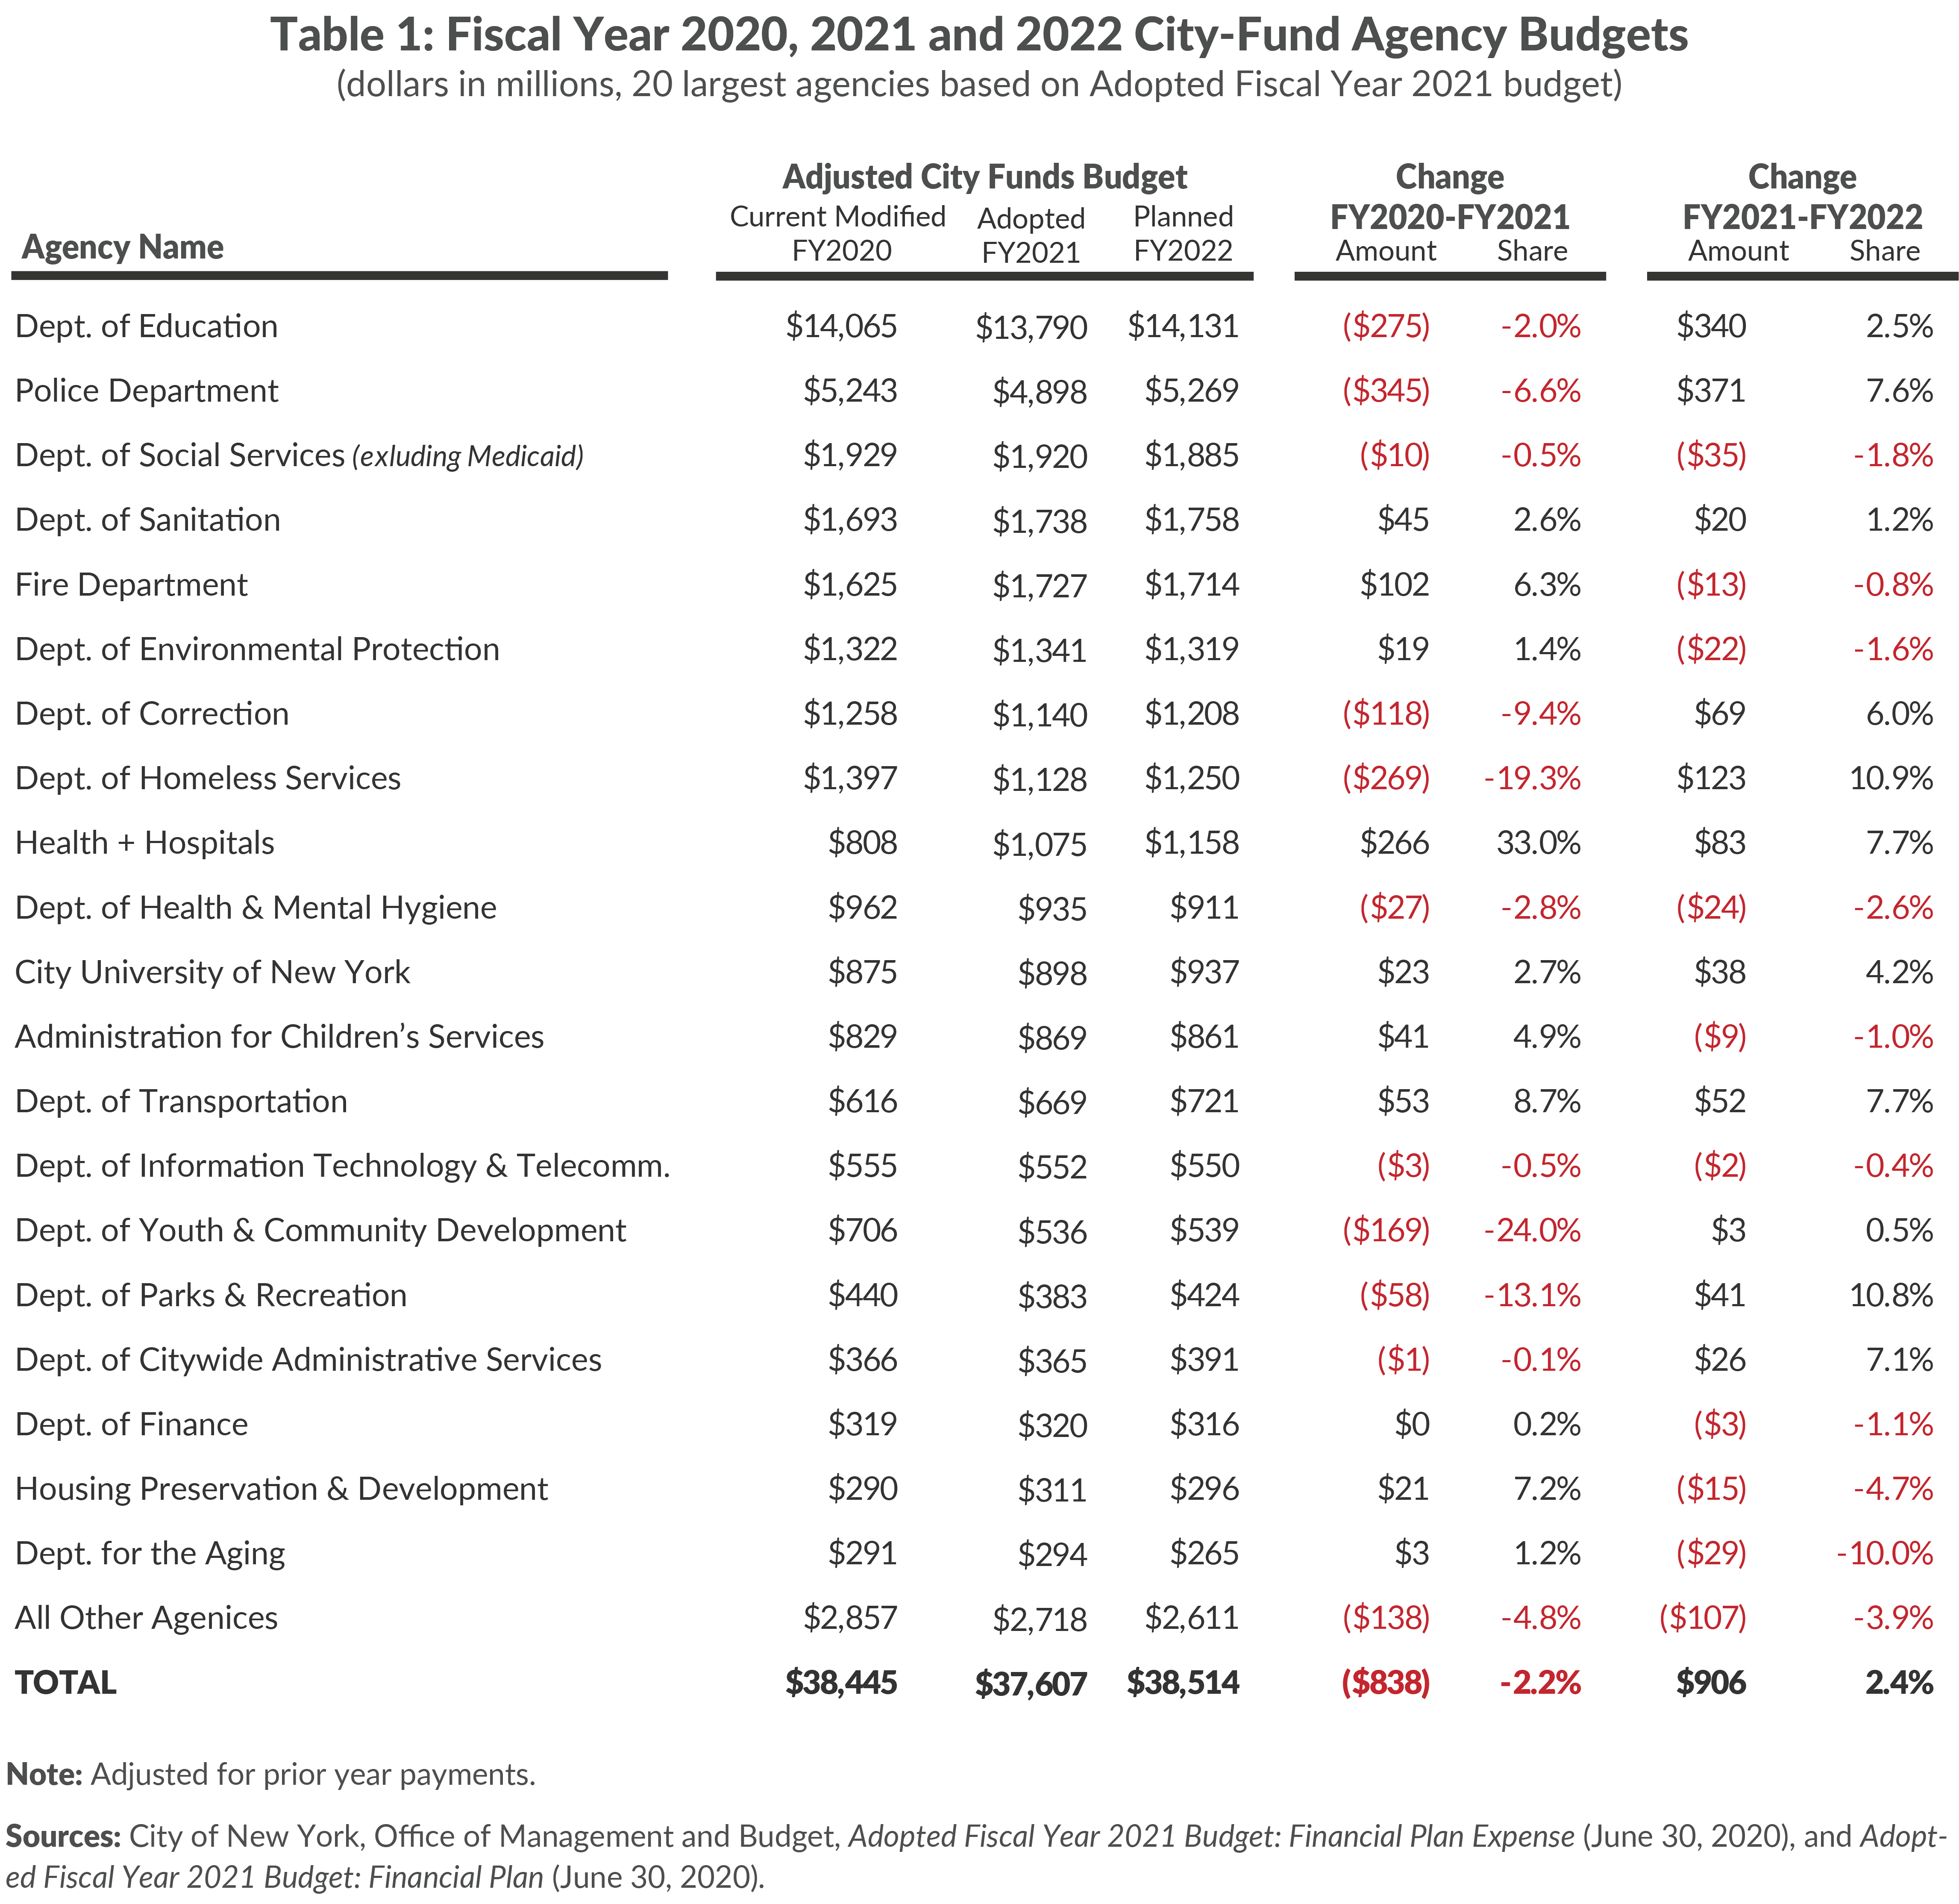 Table 1. Fiscal Year 2020, 2021 and 2022 City-Fund Agency Budgets